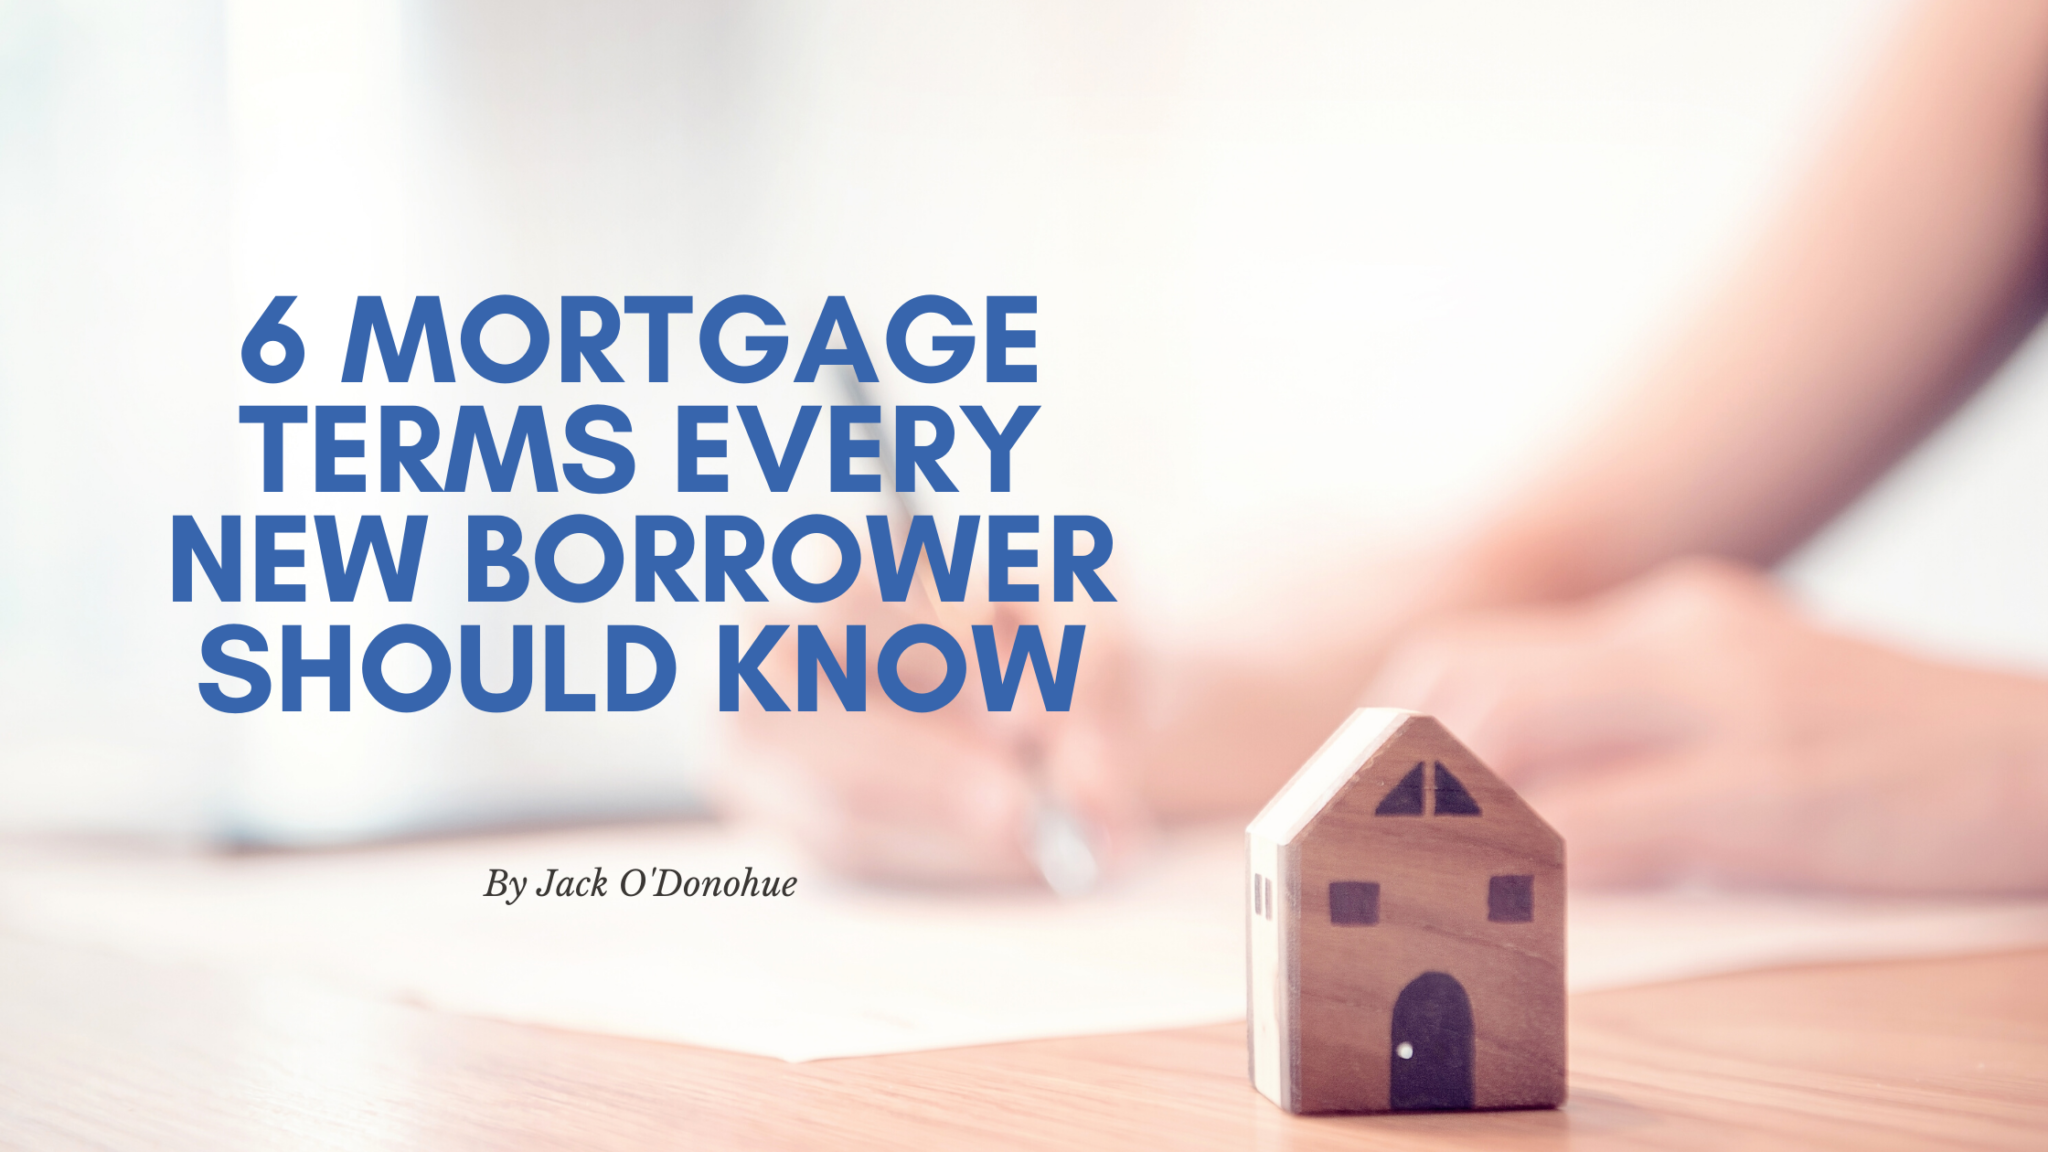 6 Mortgage Terms Every New Borrower Should Know